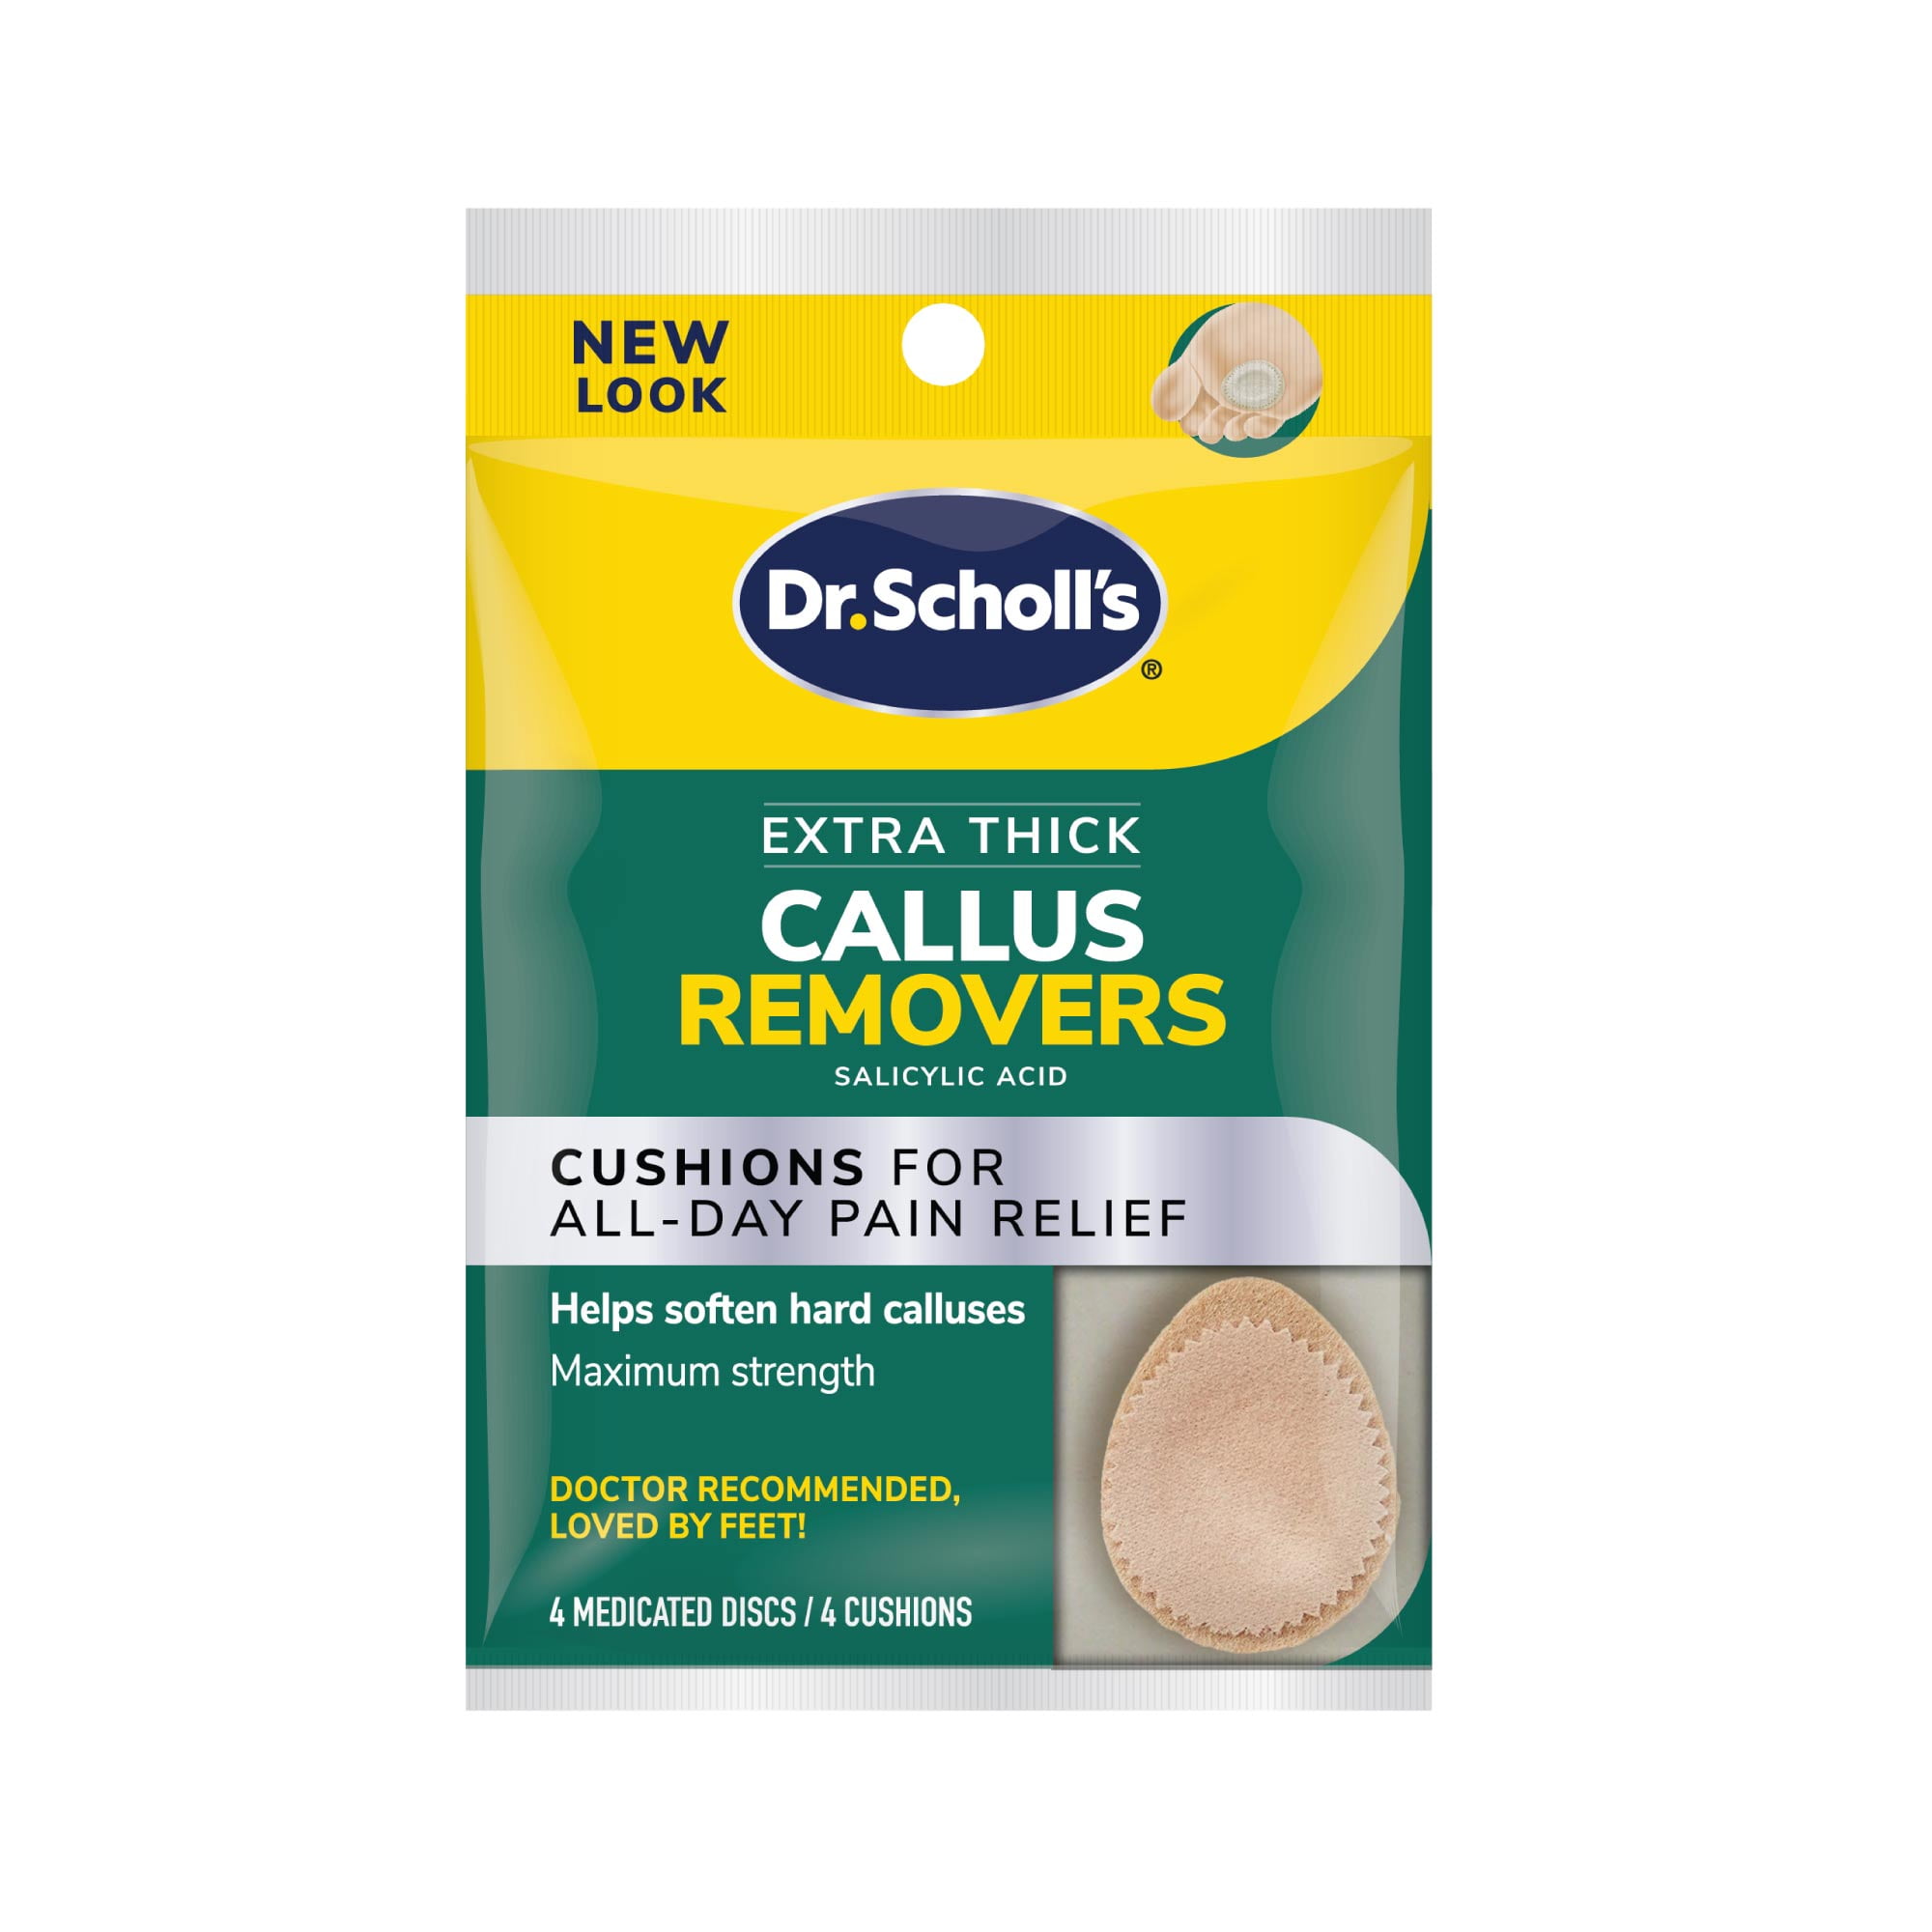 Rite Aid Extra Thick Callus Remover for Feet - 4 Pads/4 Medicated Patches | Callus Remover and Pads | Foot Care